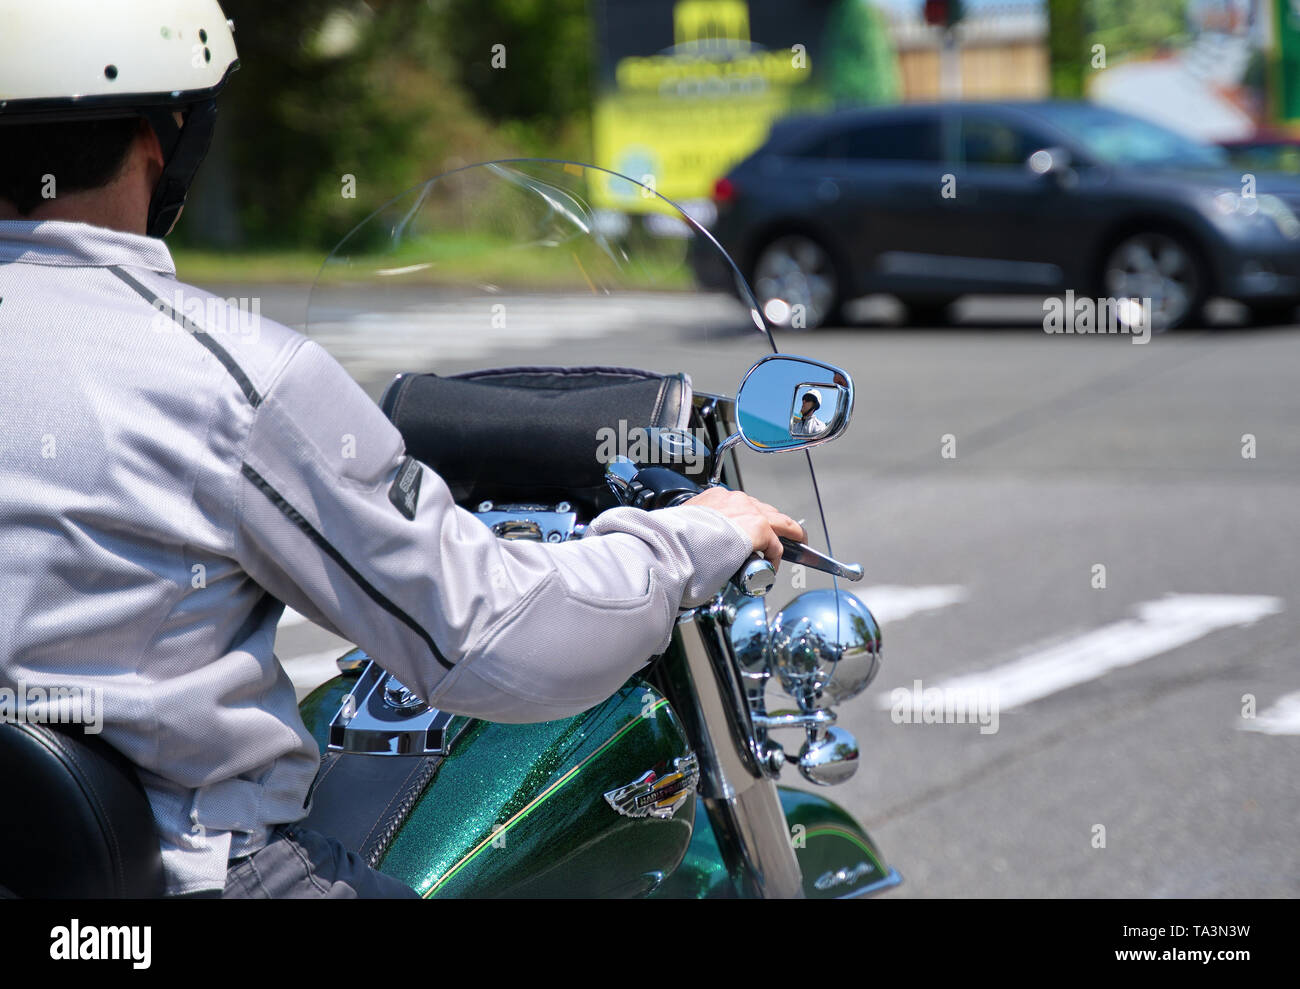 Durham, CT USA. May 2019. A focused motorcyclist on side mirror enjoying the New England weather and small town sights while at an intersection. Stock Photo